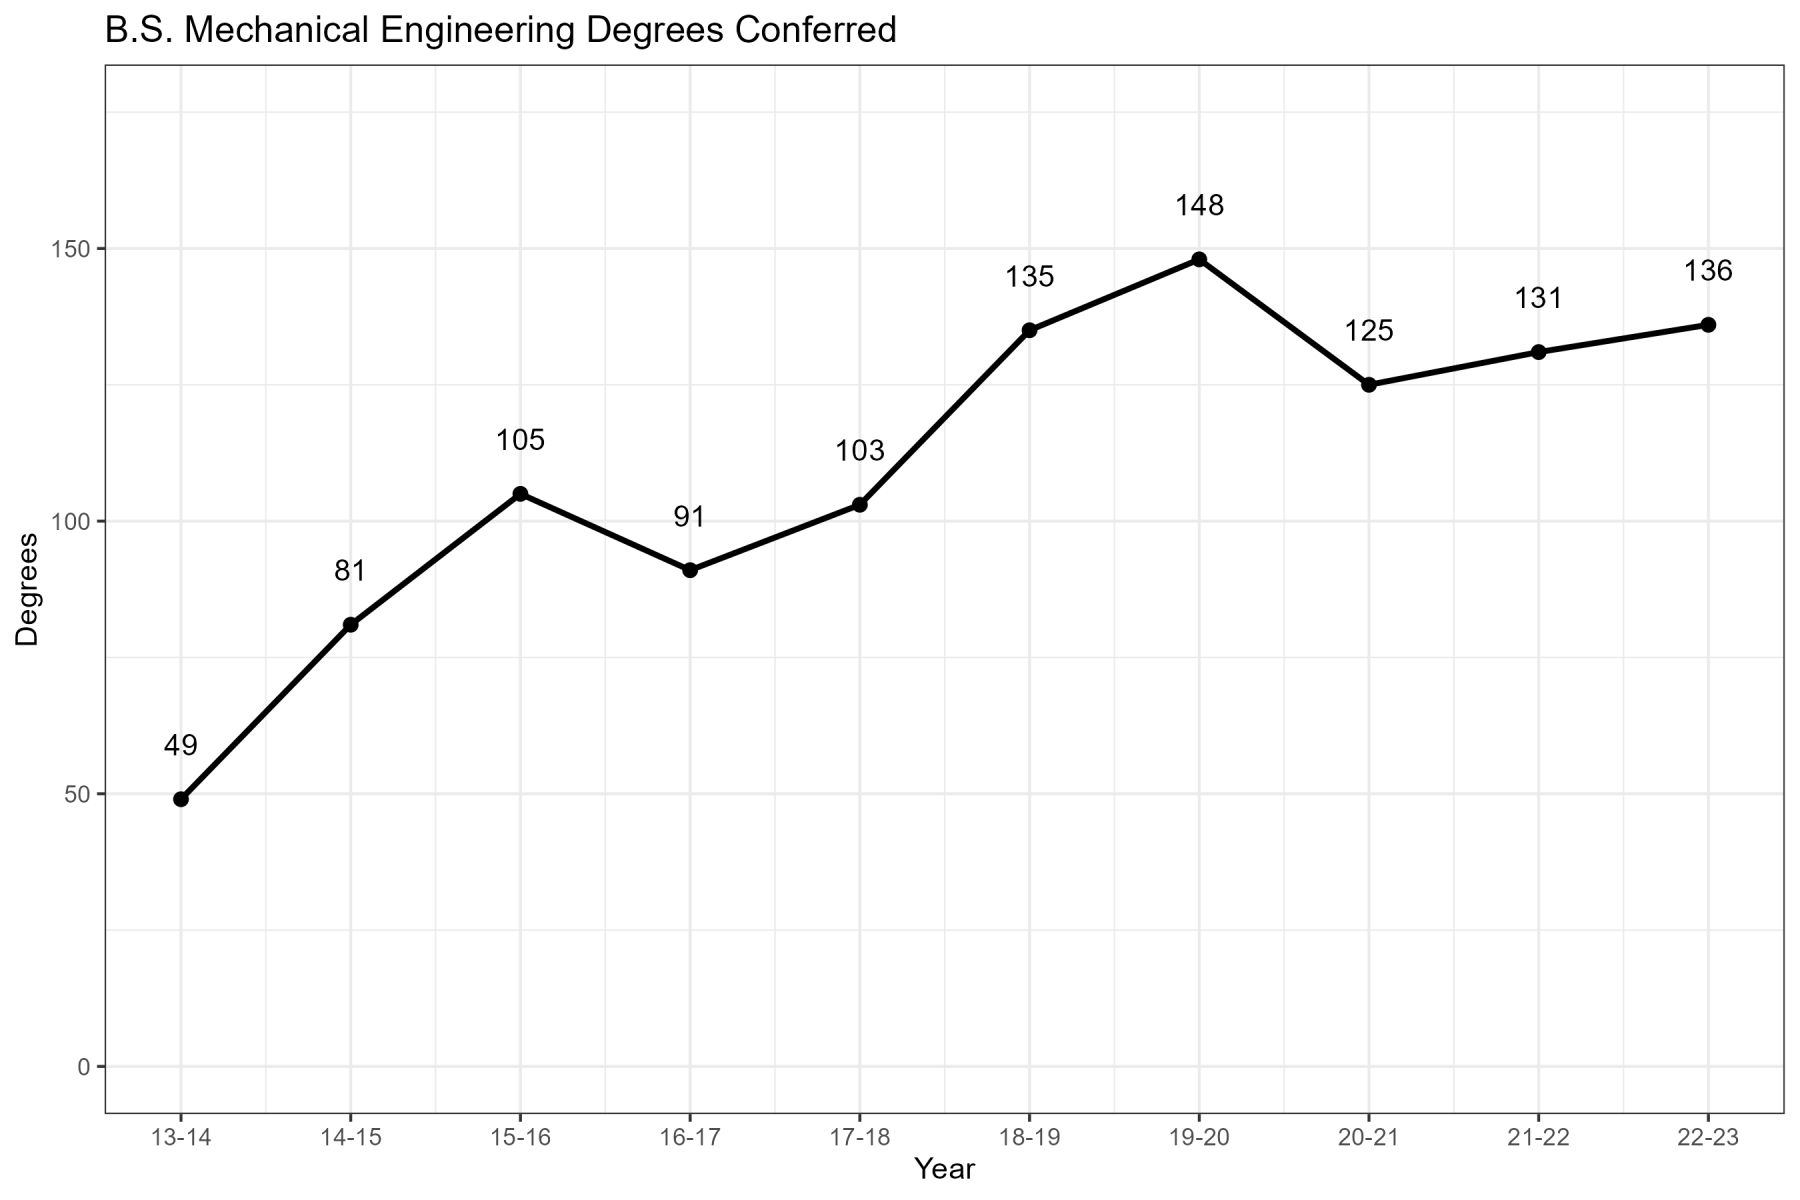 Mechanical Engineering ABET Degrees Conferred Chart